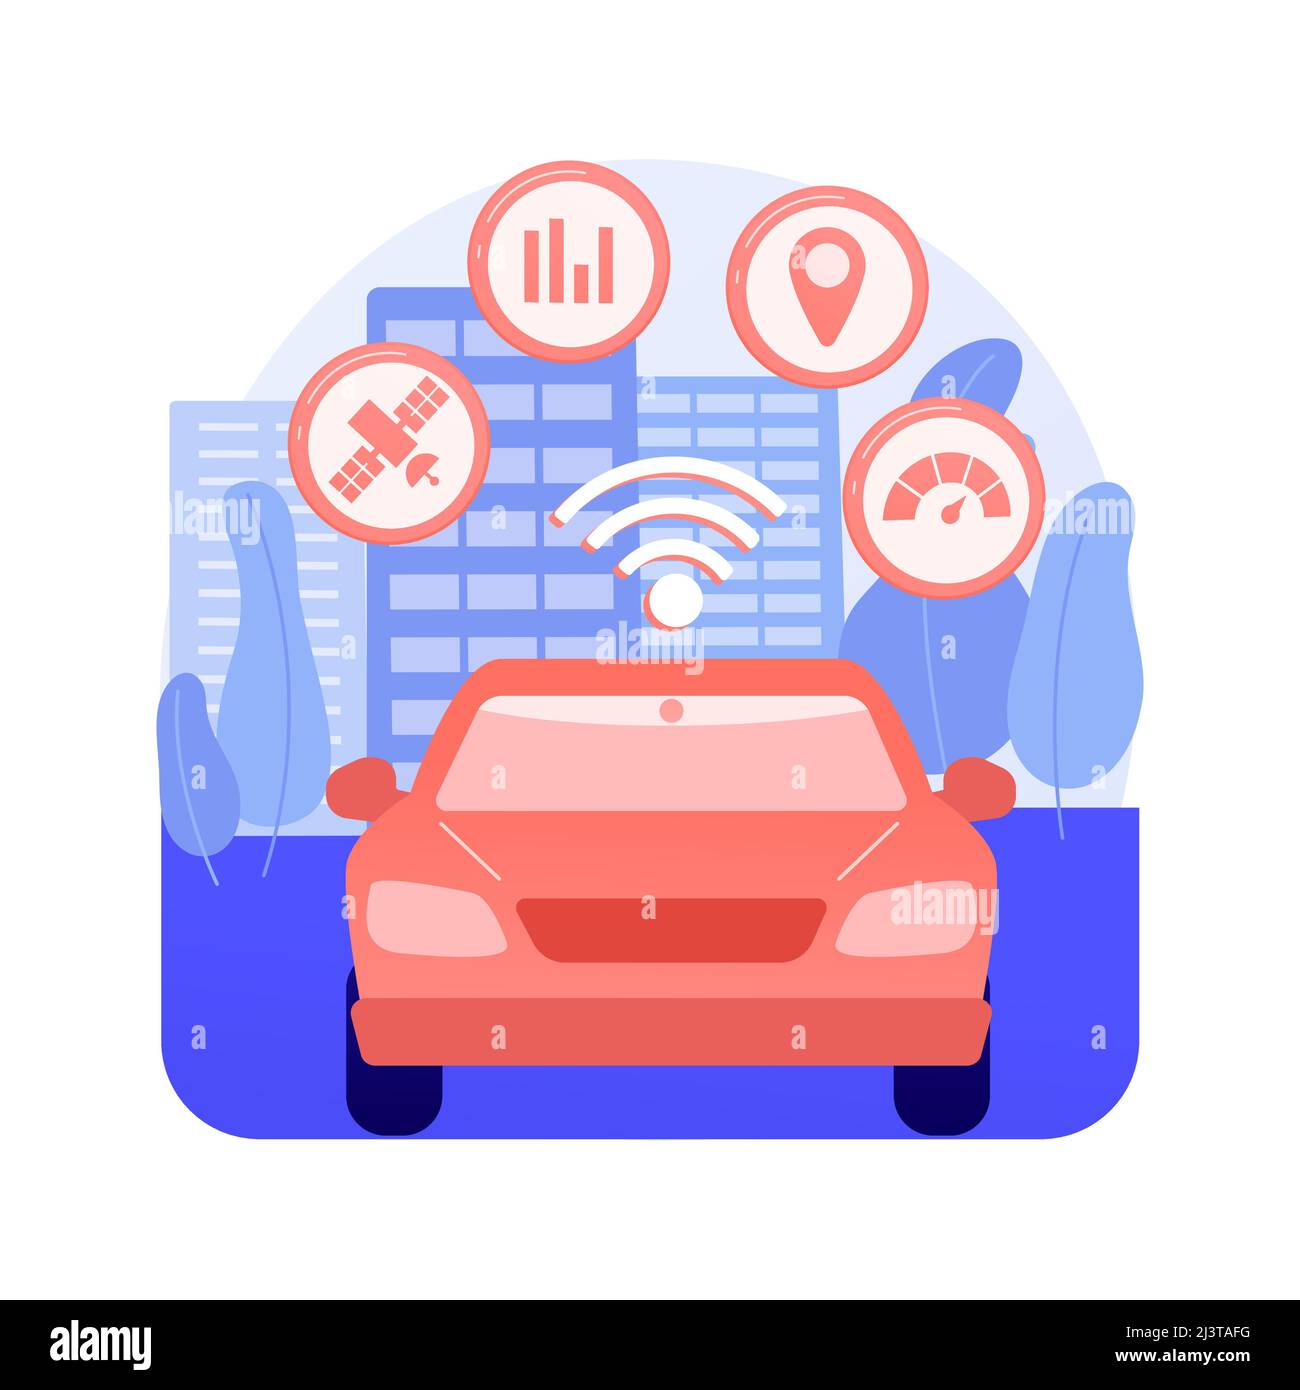 Intelligent transportation system abstract concept vector illustration. Traffic and parking management, smart city technology, road safety, travel inf Stock Vector